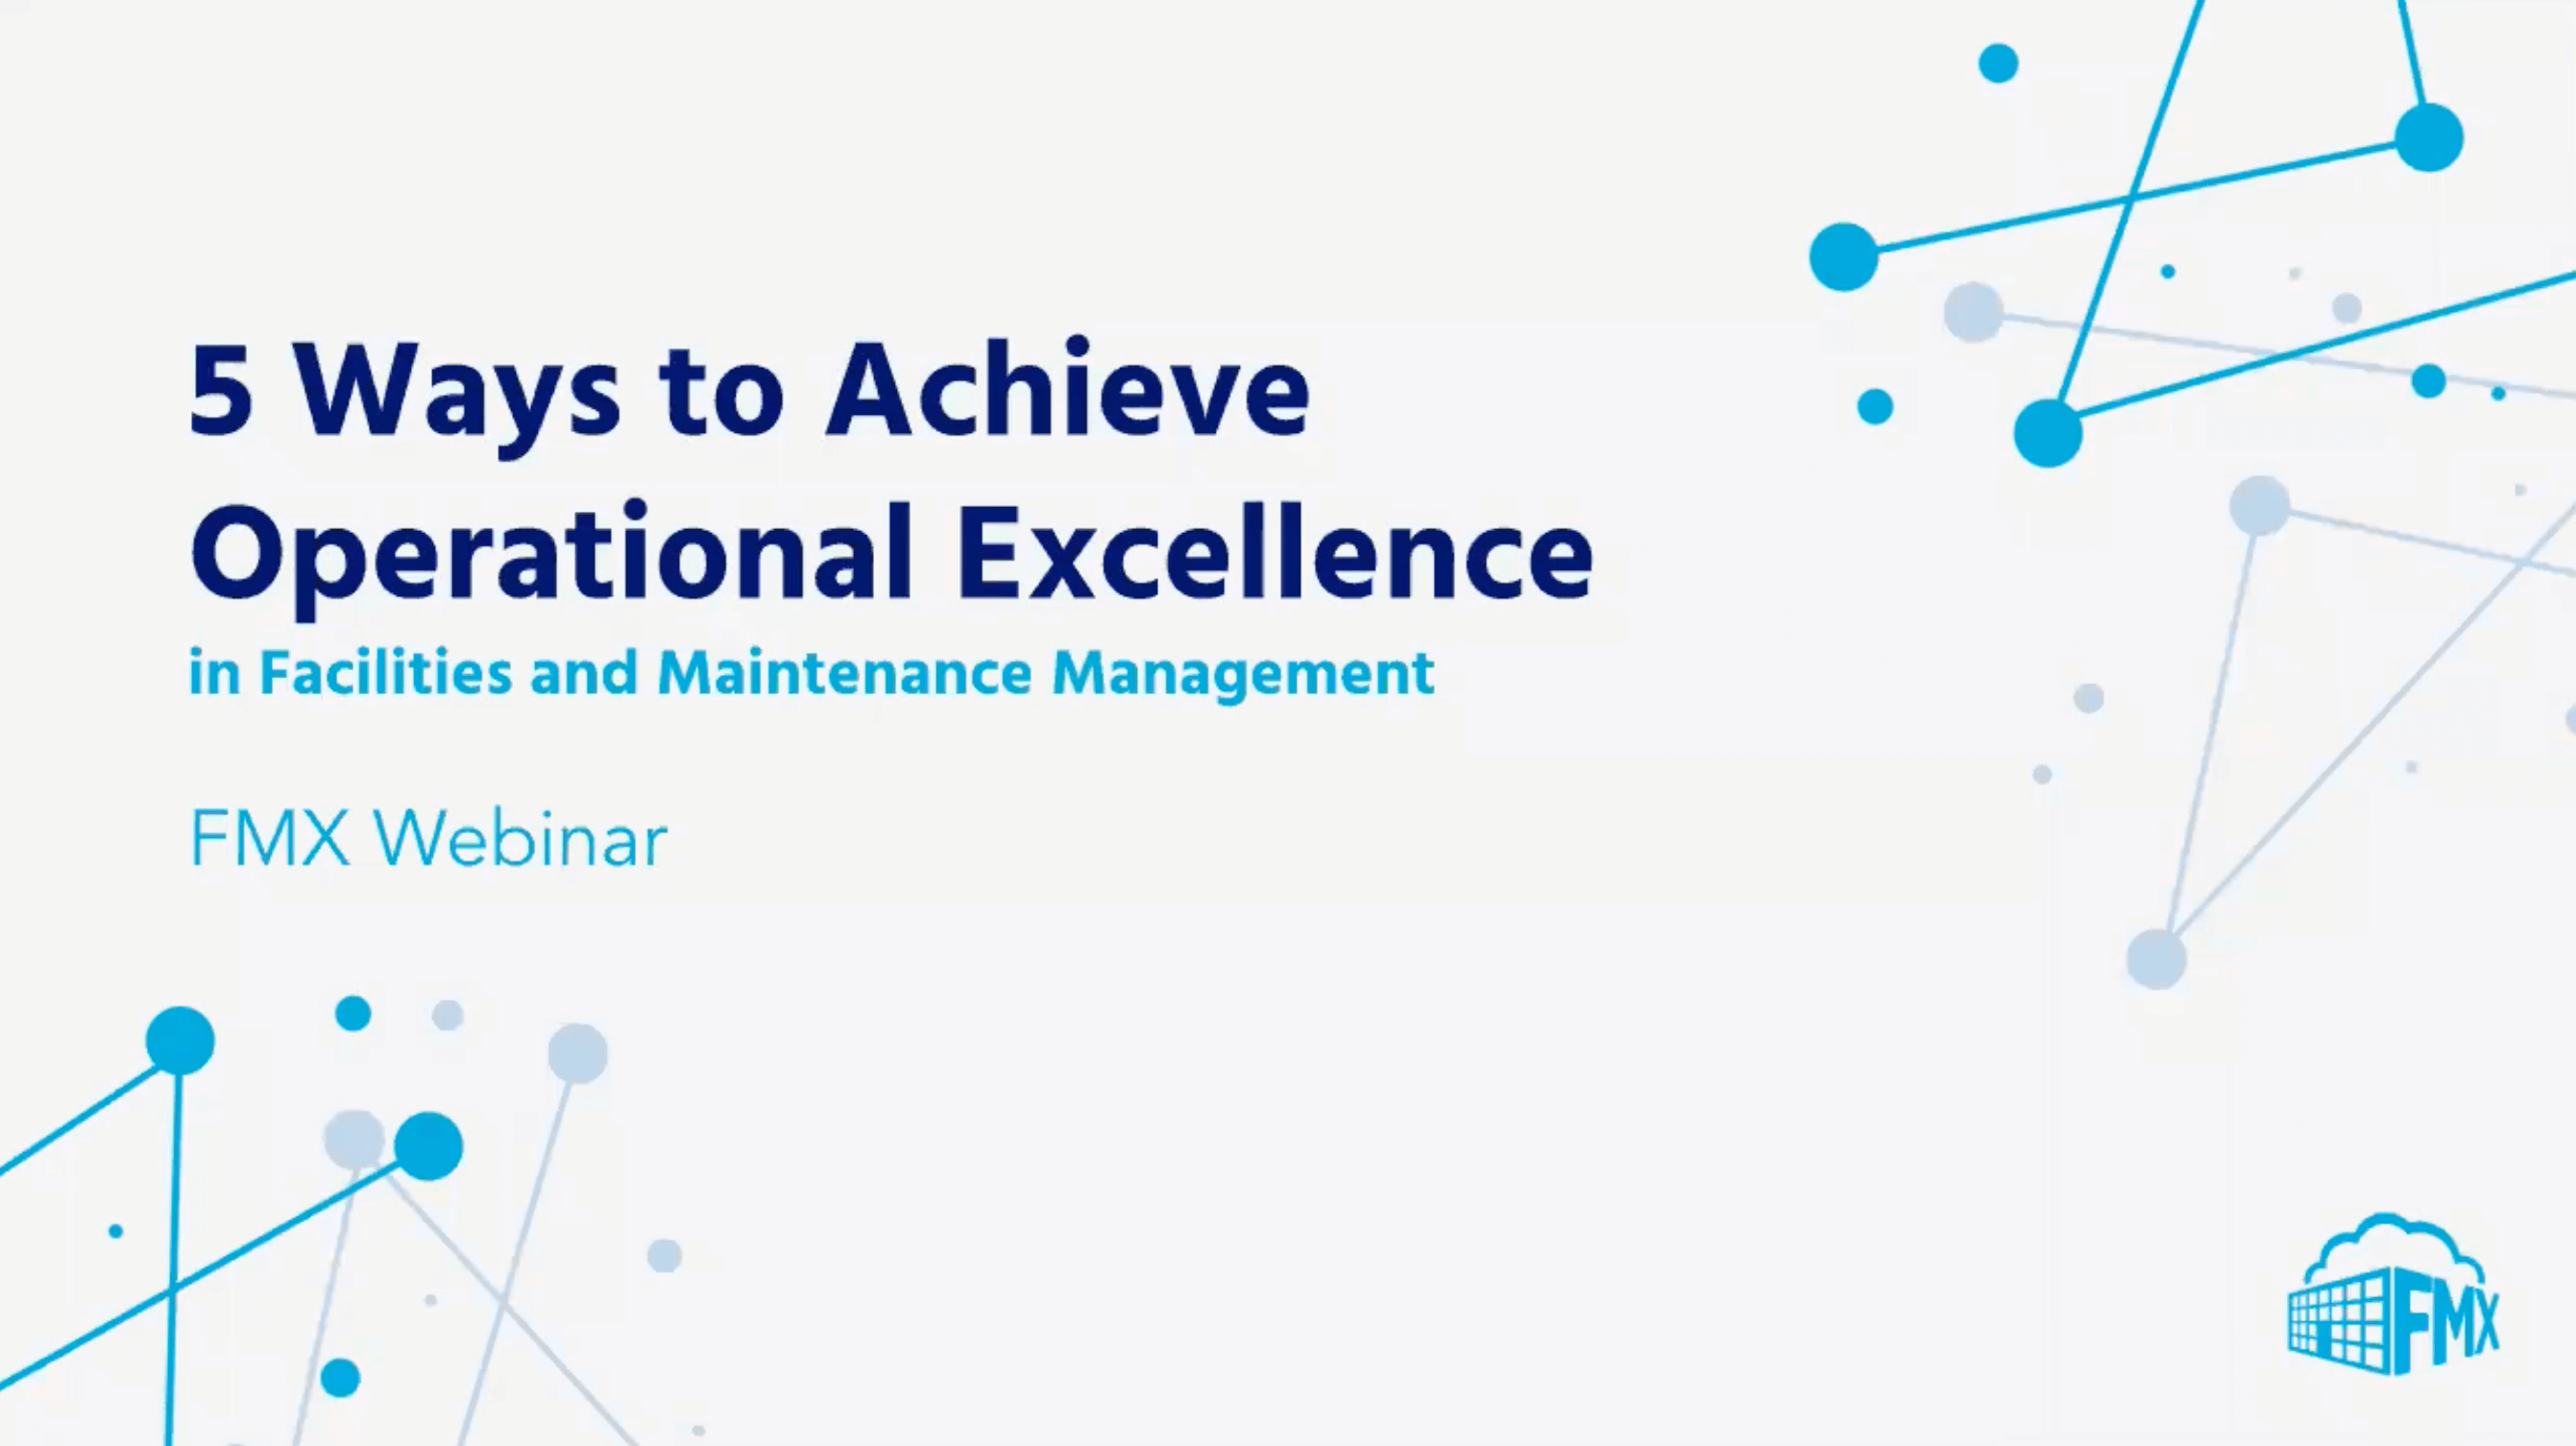 5 Ways to Achieve Operational Excellence in Facilities and Maintenance Management